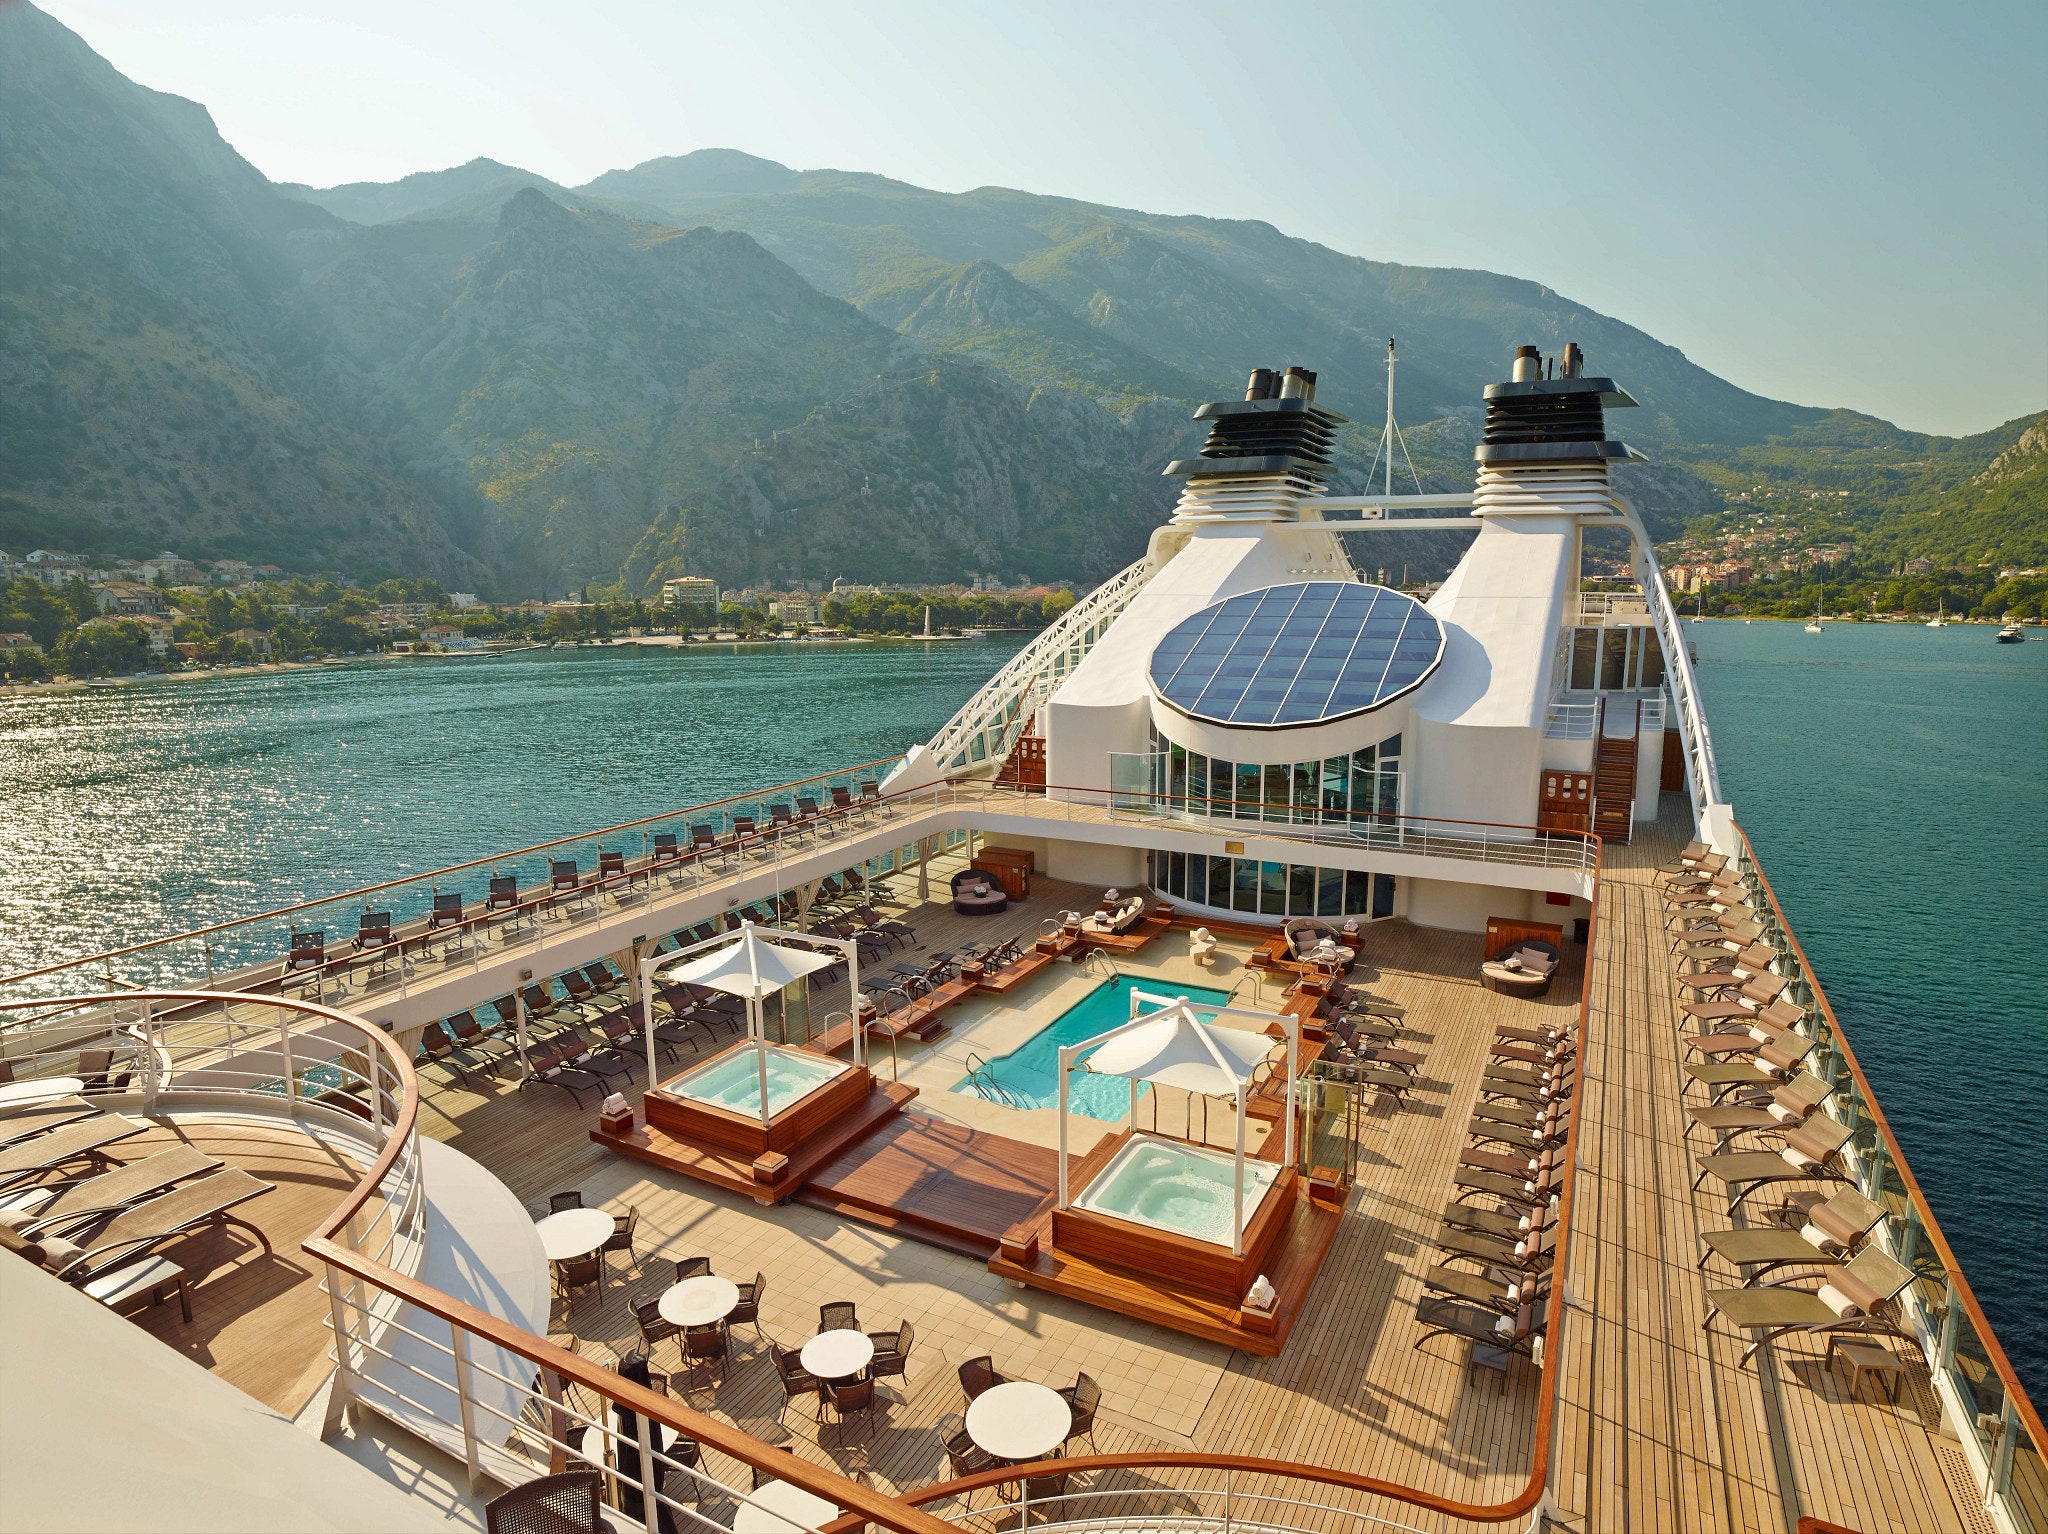 <p>Seabourn, an ultra-luxury adults-oriented line, recently introduced twin polar-class expedition ships, 264-passenger <em>Seabourn Pursuit</em> and <a href="https://www.cntraveler.com/ships/seabourn/seabourn-venture?mbid=synd_msn_rss&utm_source=msn&utm_medium=syndication"><em>Seabourn Venture,</em></a> with exploration toys like submarines and a 24-expert team to guide and engage passengers. Luxe elements include all-suite accommodations, complimentary caviar, and eight dining venues. Seabourn’s five all-suite ocean liners include the two newest and most glam 600-passenger sister ships, <a href="https://www.cntraveler.com/ships/seabourn/seabourn-ovation?mbid=synd_msn_rss&utm_source=msn&utm_medium=syndication"><em>Seabourn Ovation</em></a> and <em>Seabourn Encore</em>. Seabourn fares include all the restaurants on board (including the new Mediterranean venue Solis on non-expedition ships), alcohol, 24-hour suite dining, dancing on deck, and caviar in the surf beach barbecues.</p> <p><strong>The sailing to take this year:</strong> Seabourn ships roam the globe, with knockout itineraries like a 12-day “Canary Island Jewels and Morocco” on <em>Seabourn Ovation</em>, sailing roundtrip <a href="https://www.cntraveler.com/destinations/lisbon?mbid=synd_msn_rss&utm_source=msn&utm_medium=syndication">Lisbon</a>. Imagine sipping local wine in the westernmost Canaries, wandering lively souks in Tangier, and learning to cook delicious <a href="https://www.cntraveler.com/story/where-to-eat-stay-and-play-in-old-fez-morocco?mbid=synd_msn_rss&utm_source=msn&utm_medium=syndication">Moroccan</a> specialties. <em>Departs April 26, from <a href="https://www.seabourn.com/en/us/cruise-ships/seabourn-ovation/3">$6,204 per person</a>.</em></p><p>Sign up to receive the latest news, expert tips, and inspiration on all things travel</p><a href="https://www.cntraveler.com/newsletter/the-daily?sourceCode=msnsend">Inspire Me</a>